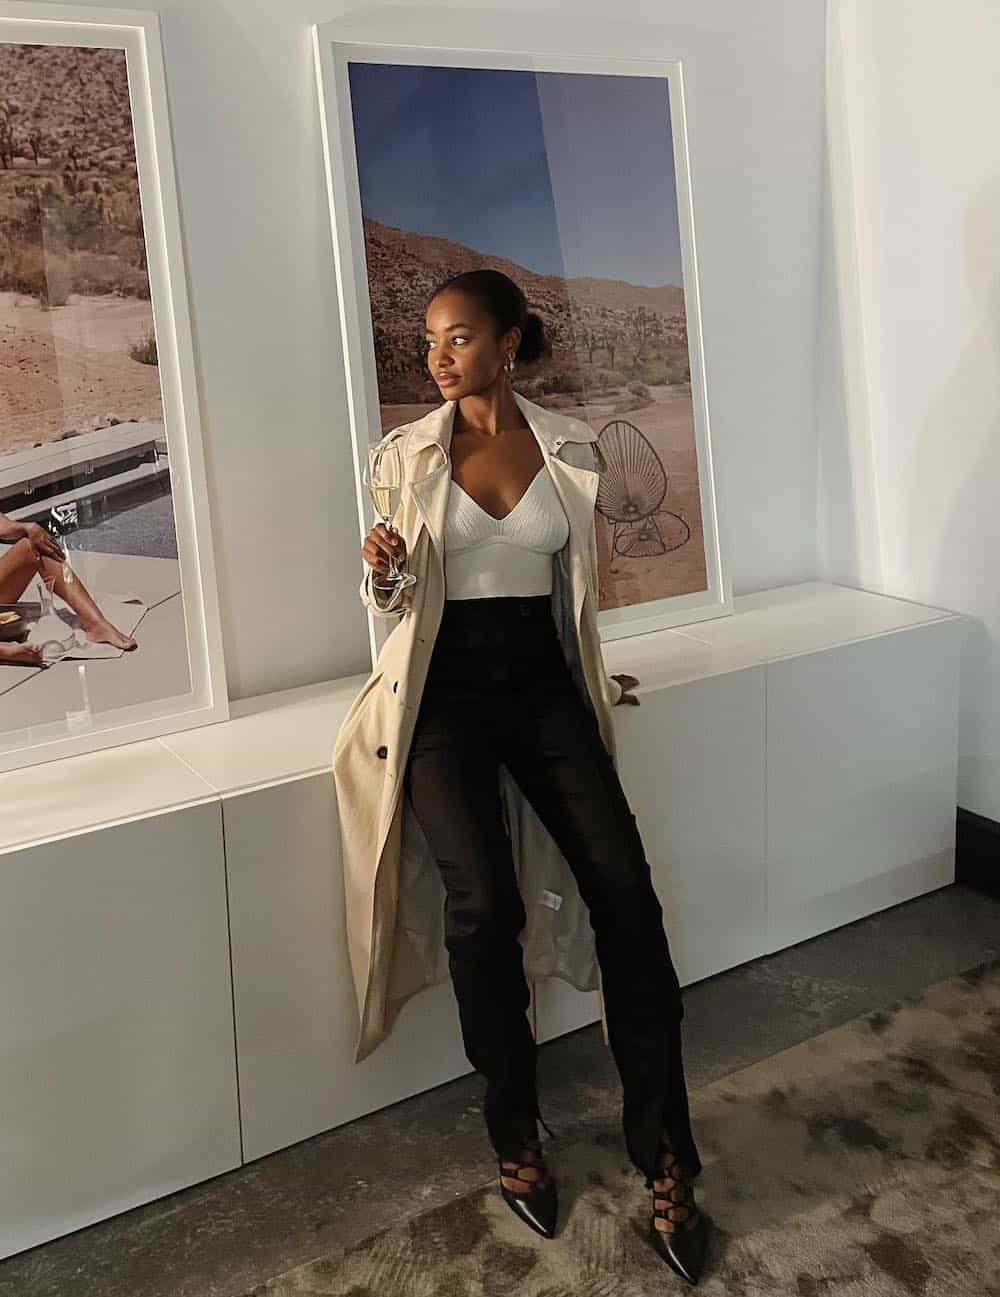 Black woman wearing a long tan trench coat over a white top and black pants with heels